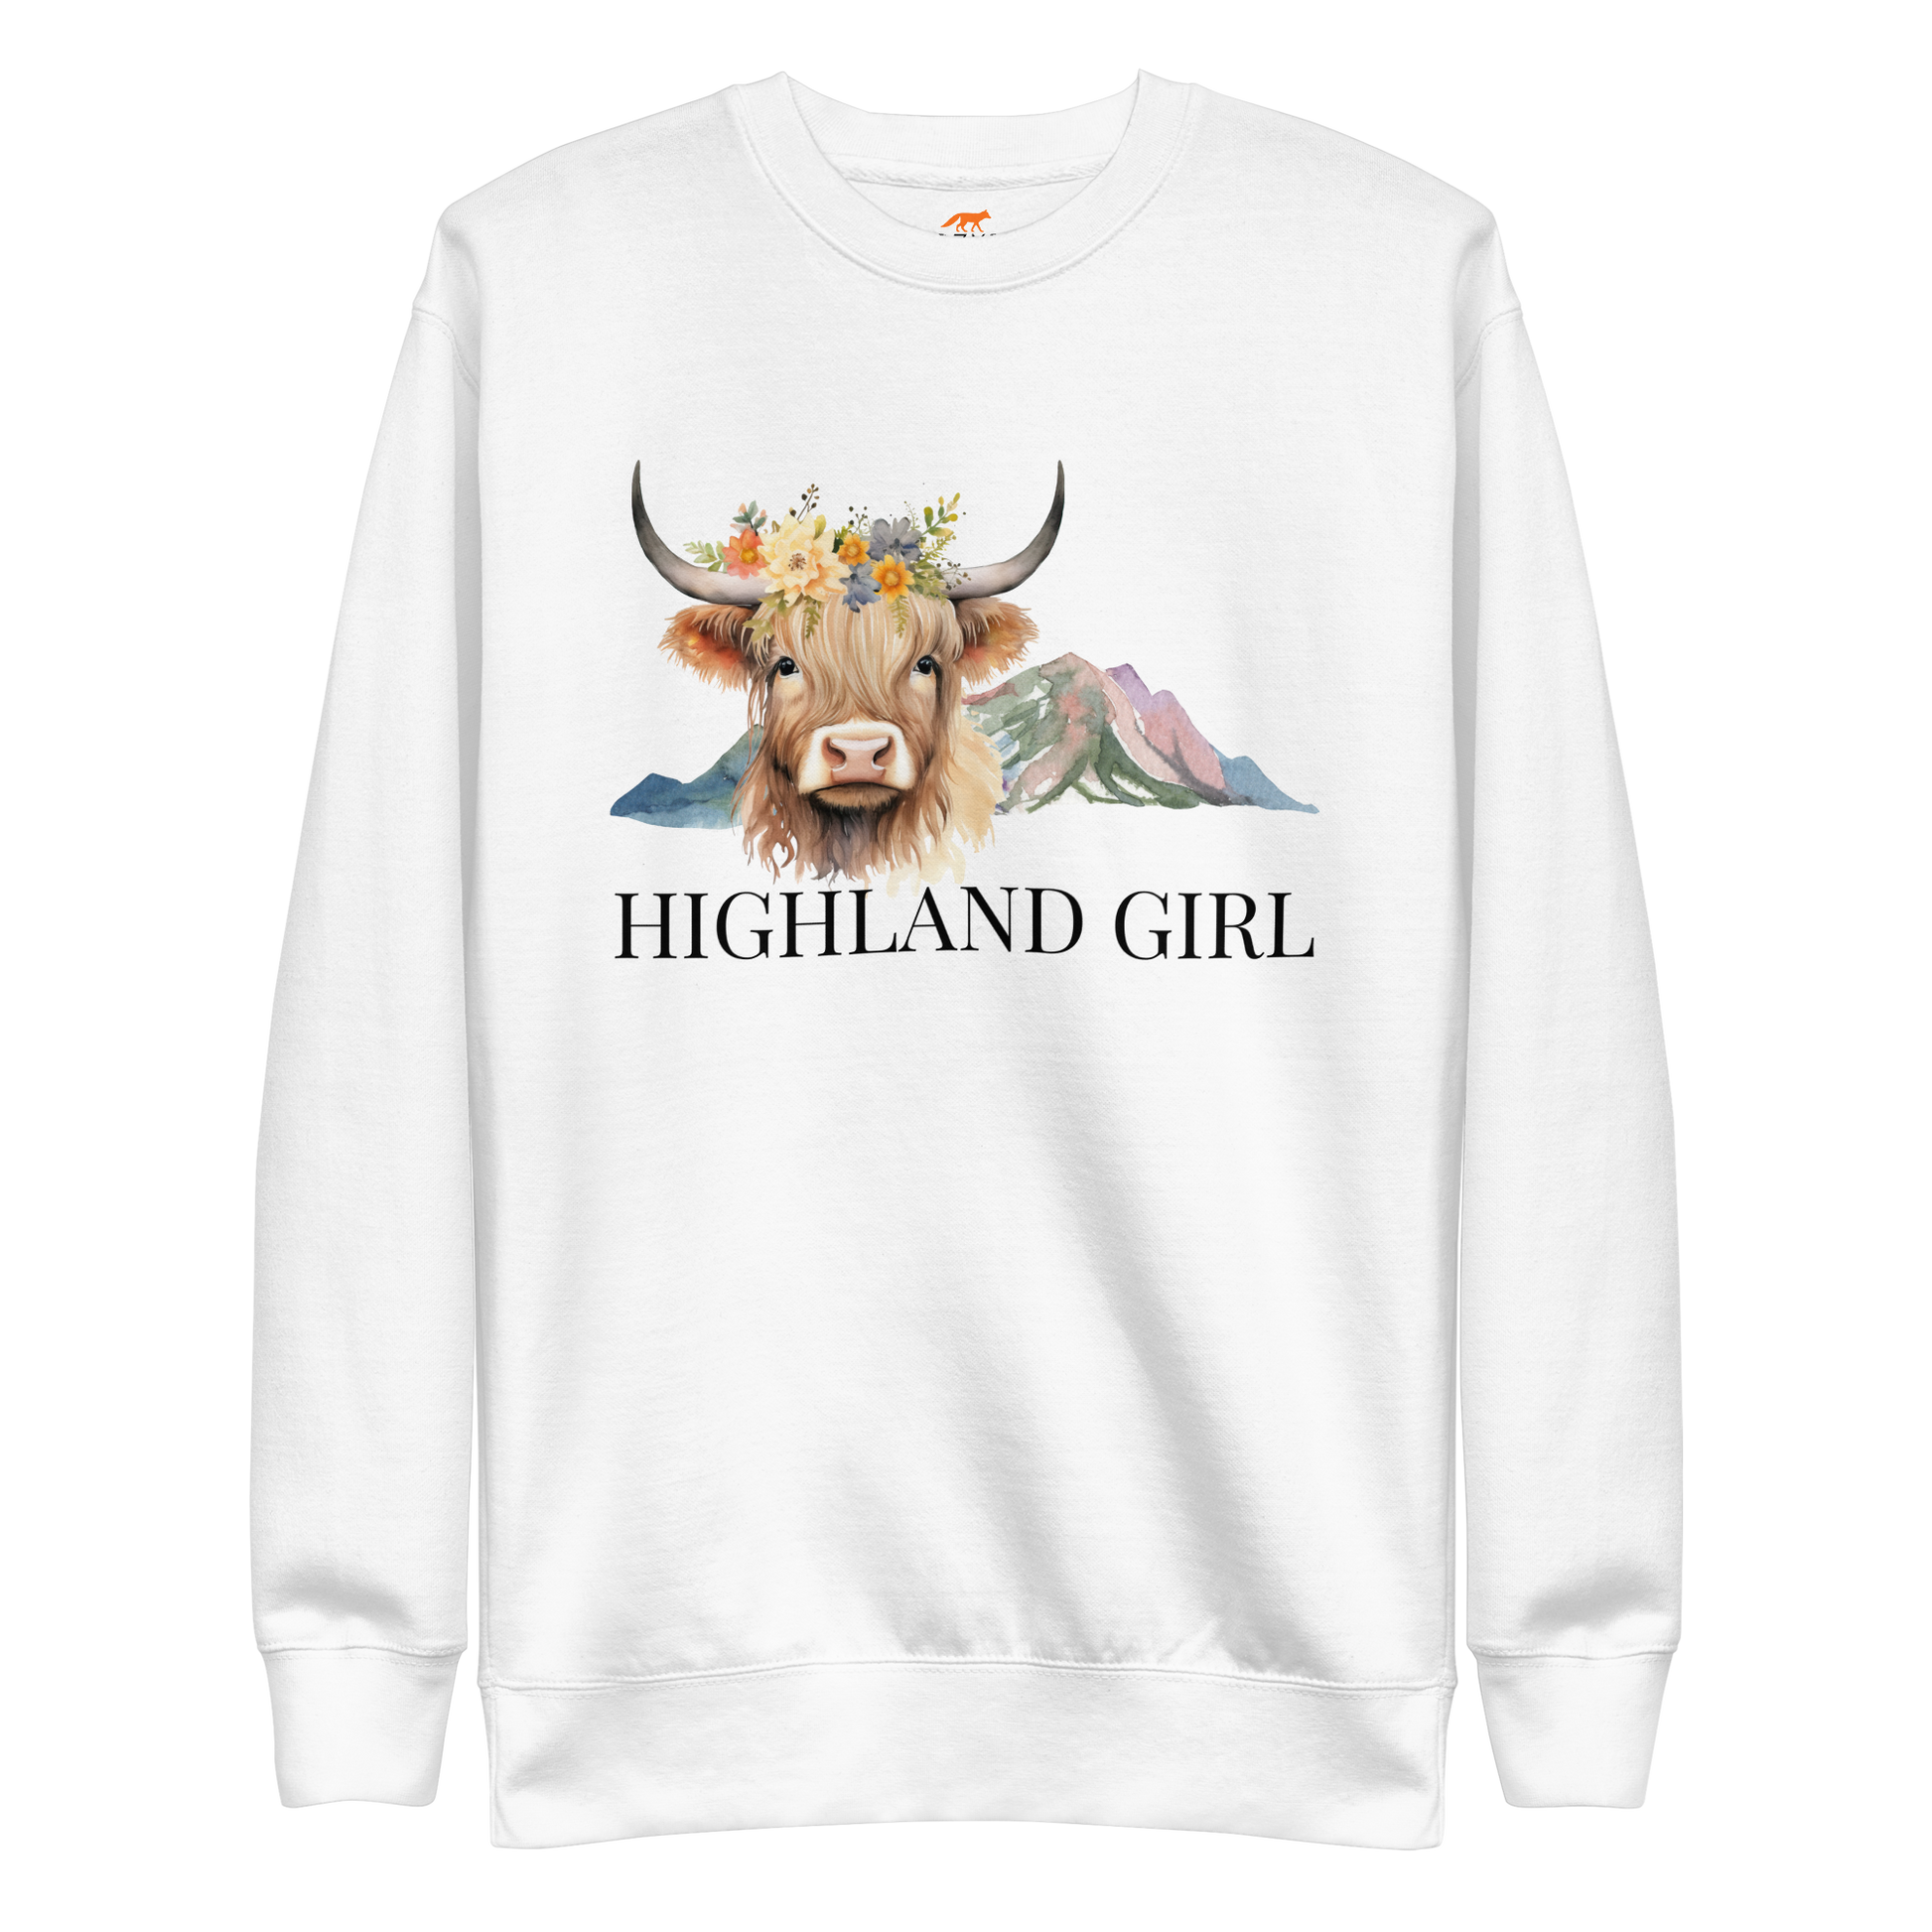 White Premium Highland Cow Sweatshirt featuring an adorable Highland Girl graphic on the chest - Cute Graphic Highland Cow Sweatshirts - Boozy Fox